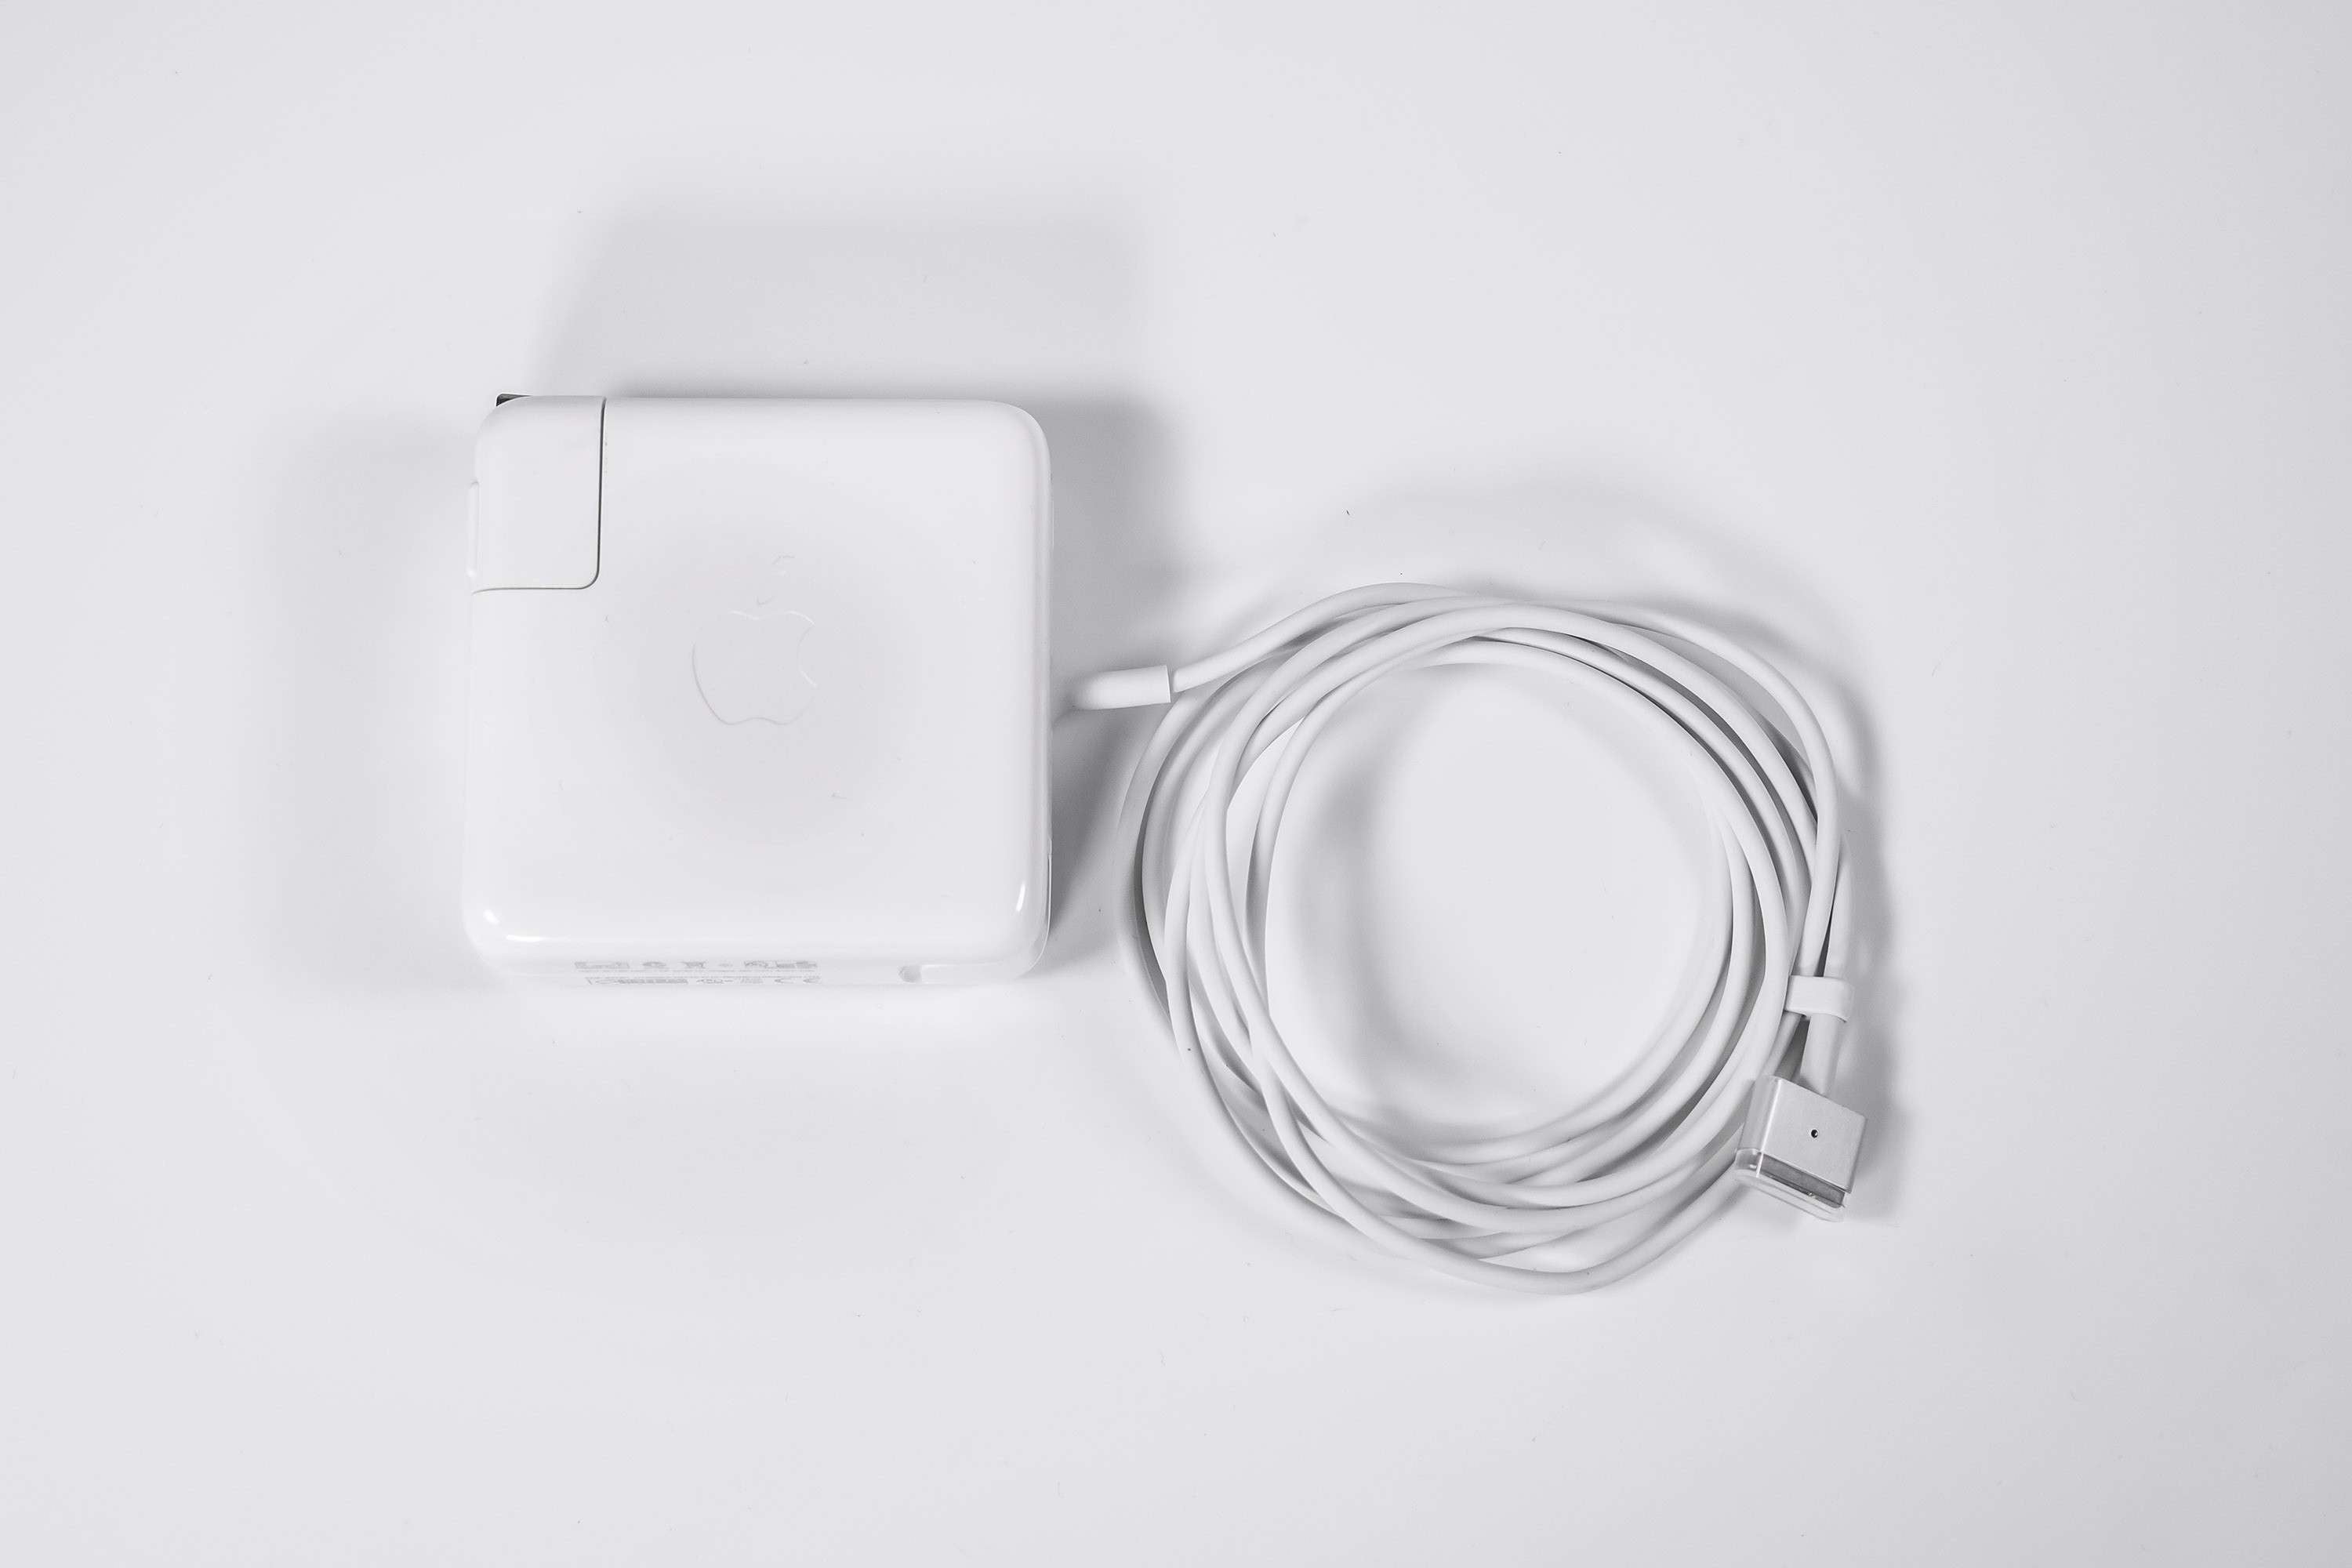 Apple Mac Charger - MacBook Pro R etina Late 2013 Charger (For parts)